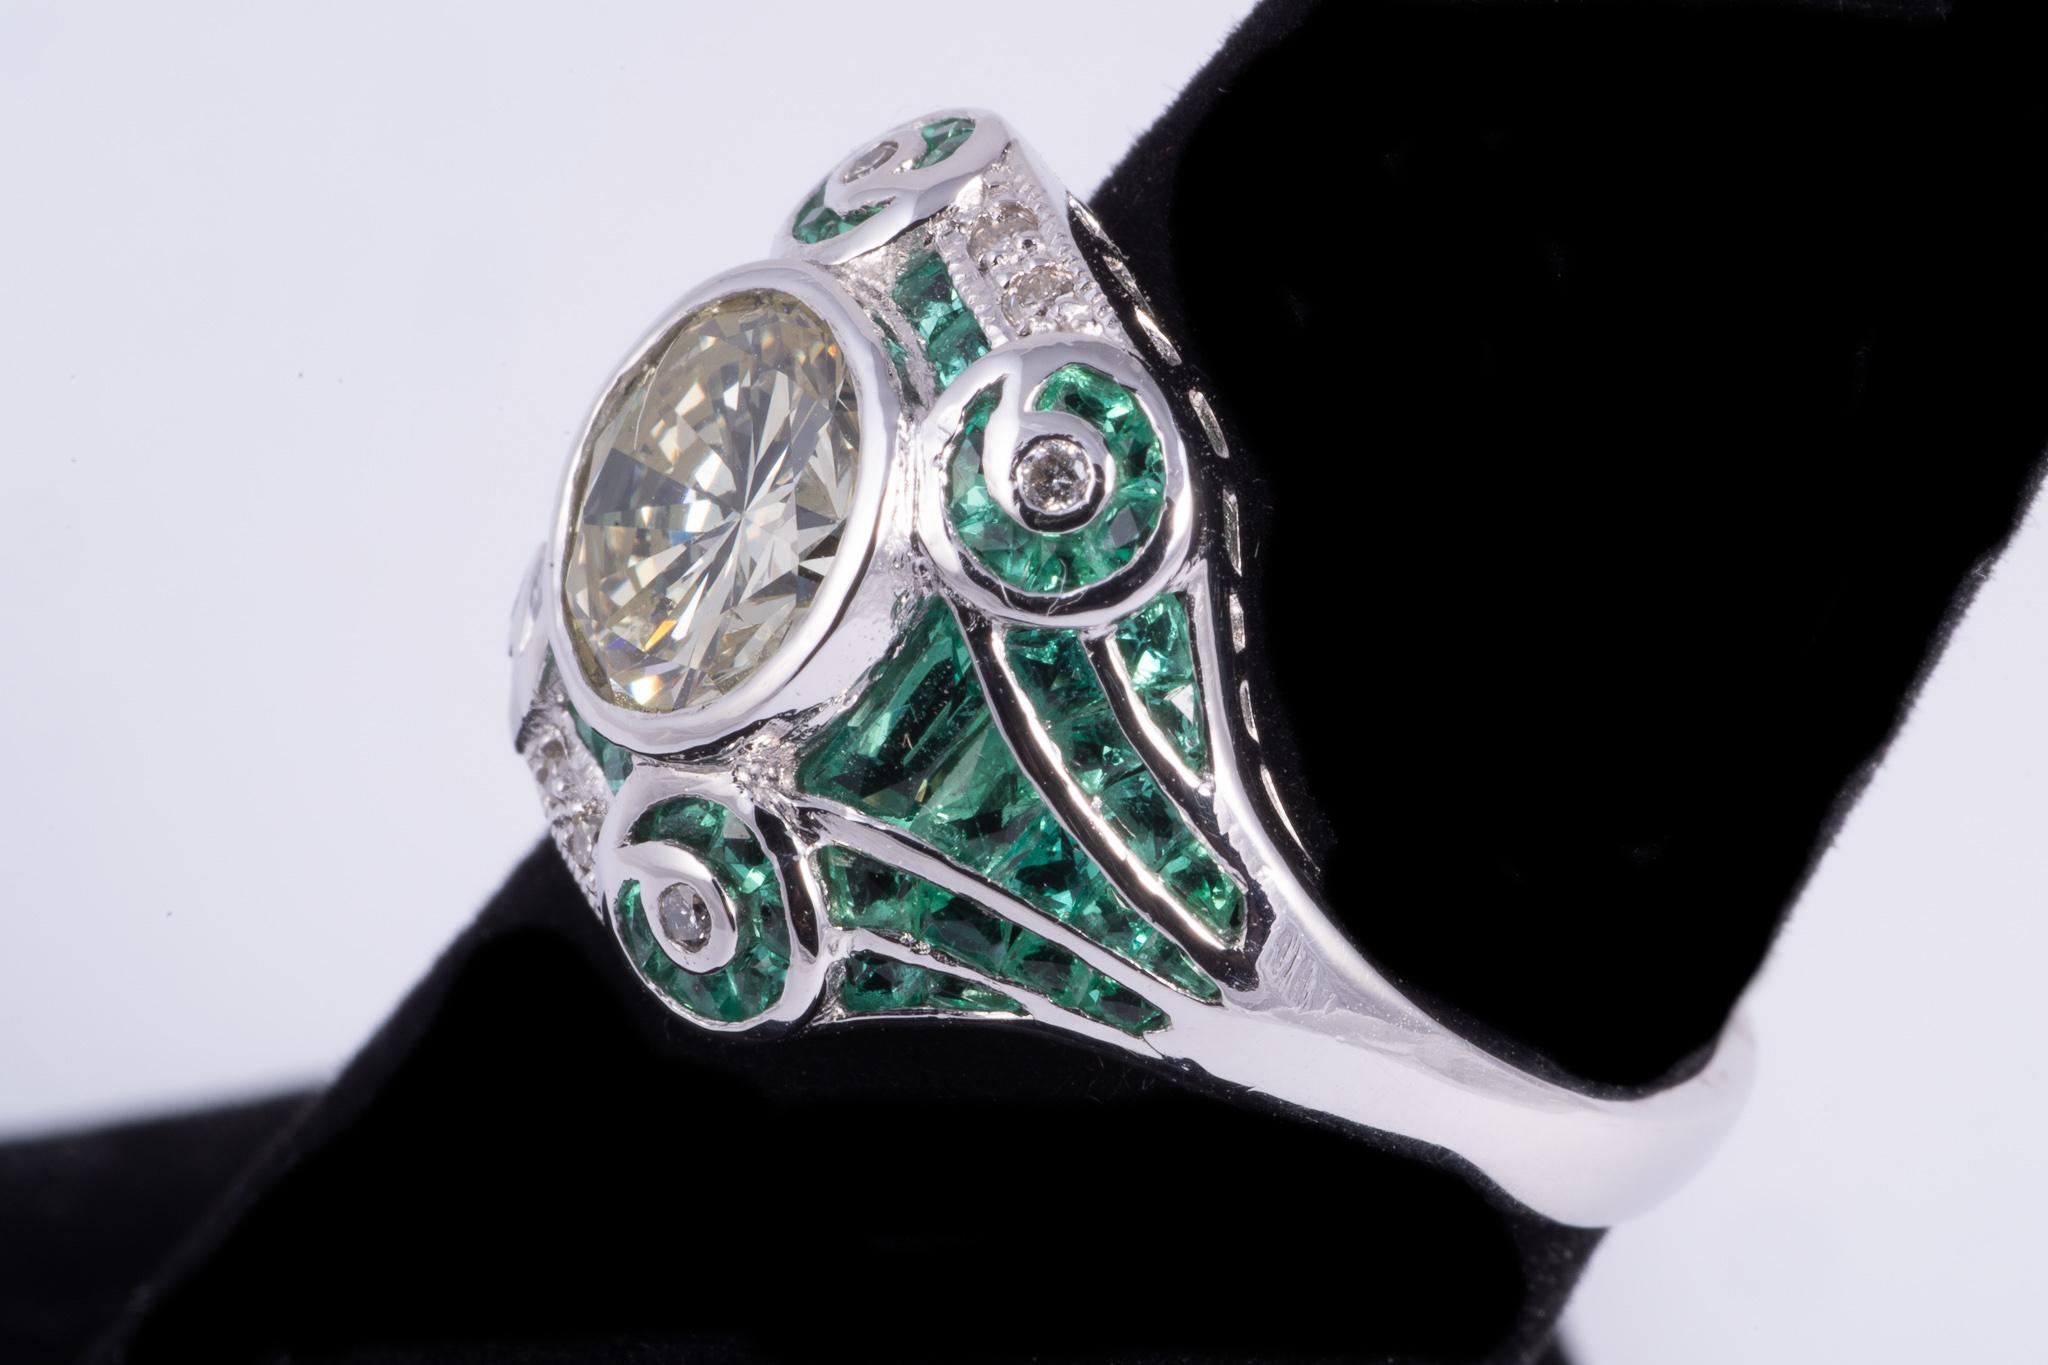 This ring features and 1.41ct natural yellow round brilliant cut diamond. The ring is accented by calibre cut emeralds and full cut diamonds weighing approx. .05cts. Set in platinum, 6.00grams. Size 6.5 and is sizable.